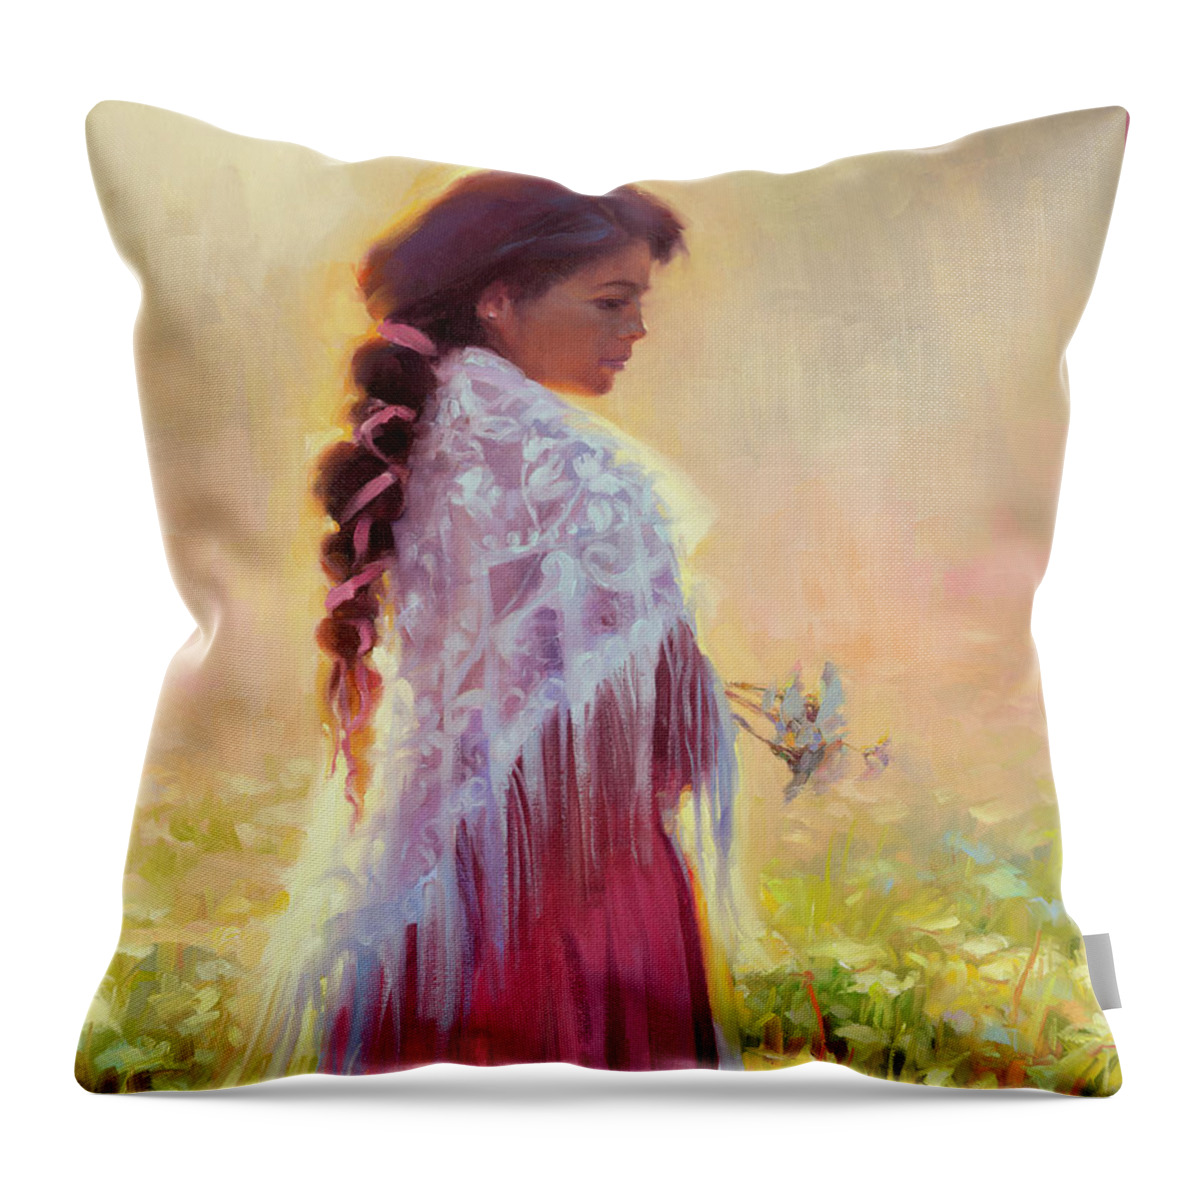 Woman Throw Pillow featuring the painting Queen Anne's Lace by Steve Henderson